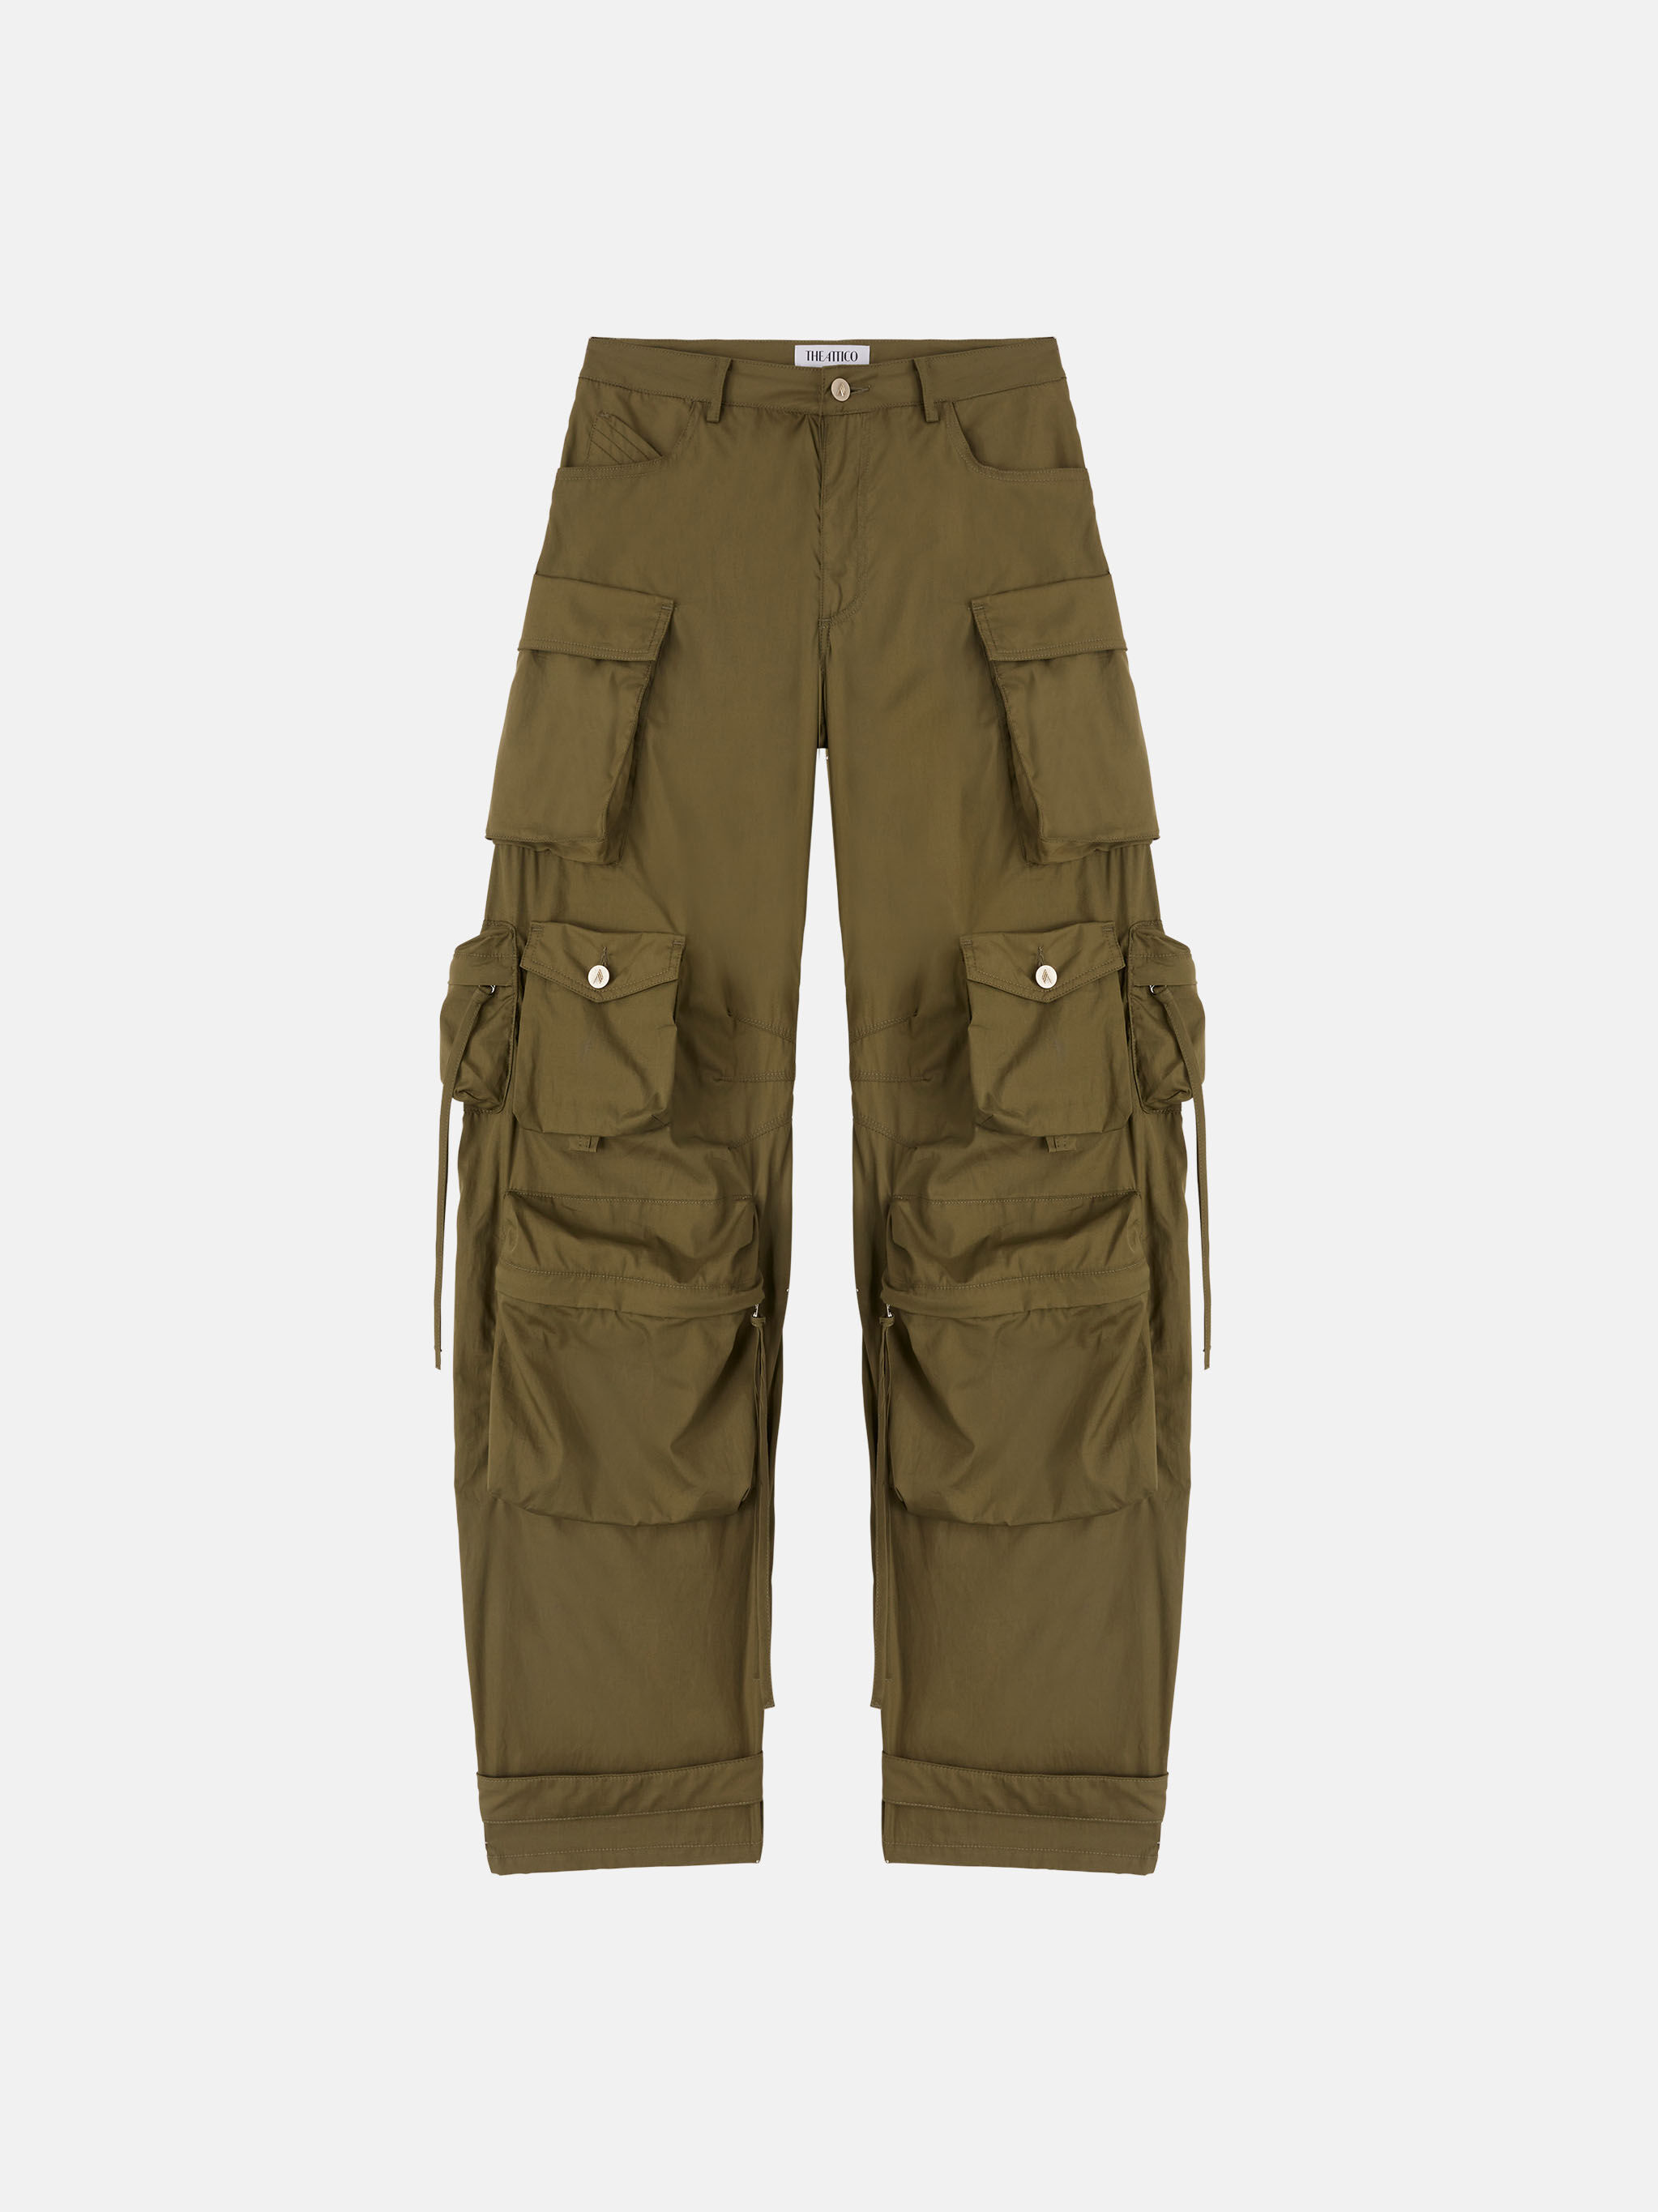 Fern'' military long pants for Women | THE ATTICO®